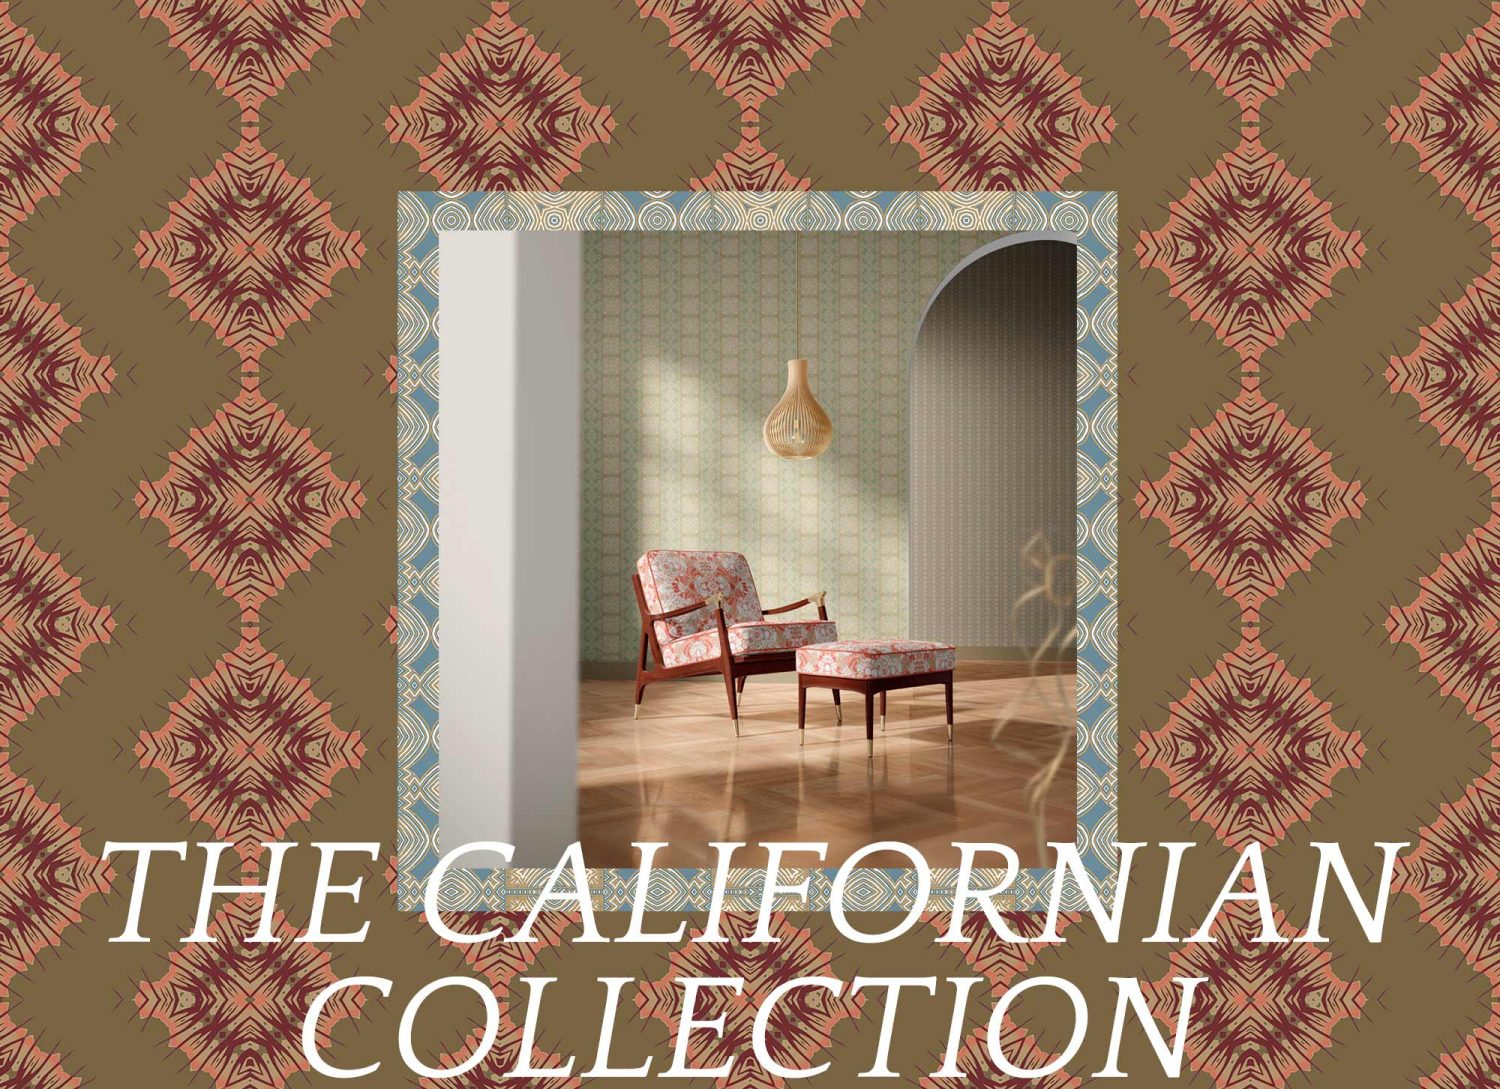 New wallpaper and fabric collection from Pearl and Maude, based on a California feeling. A diamond pattern on a brown background, a chair upholstered in a rust floral fabric and green tile wallpaper in a restful sitting room